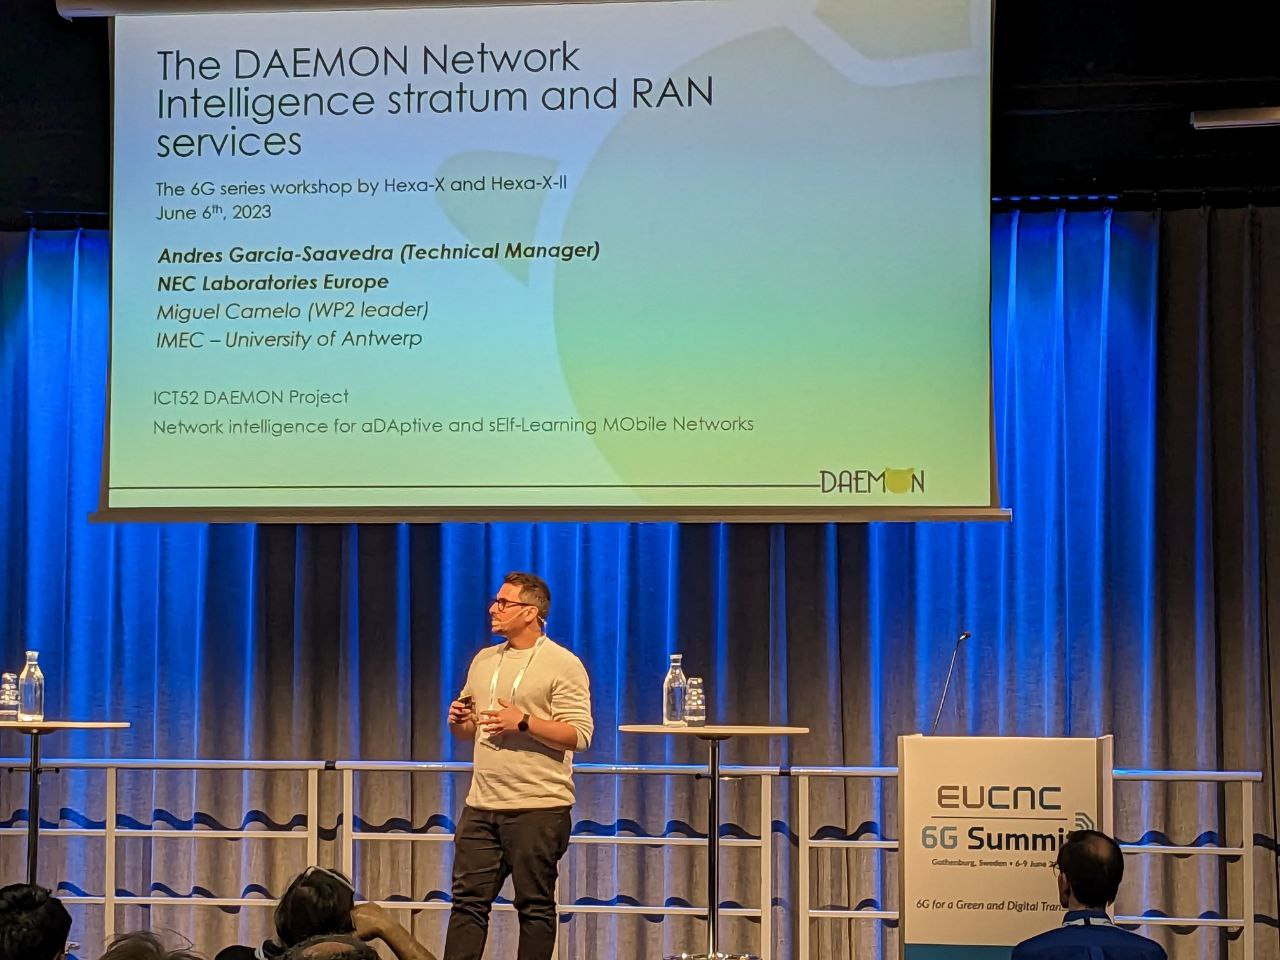 NEW @h2020daemon presentation of our member Andrés Garcia-Saavedra in the European Conference on Networks and Communications #EUCNC 23 in Gothenburg #h2020daemon #H2020 @EU_H2020 @5GPPP